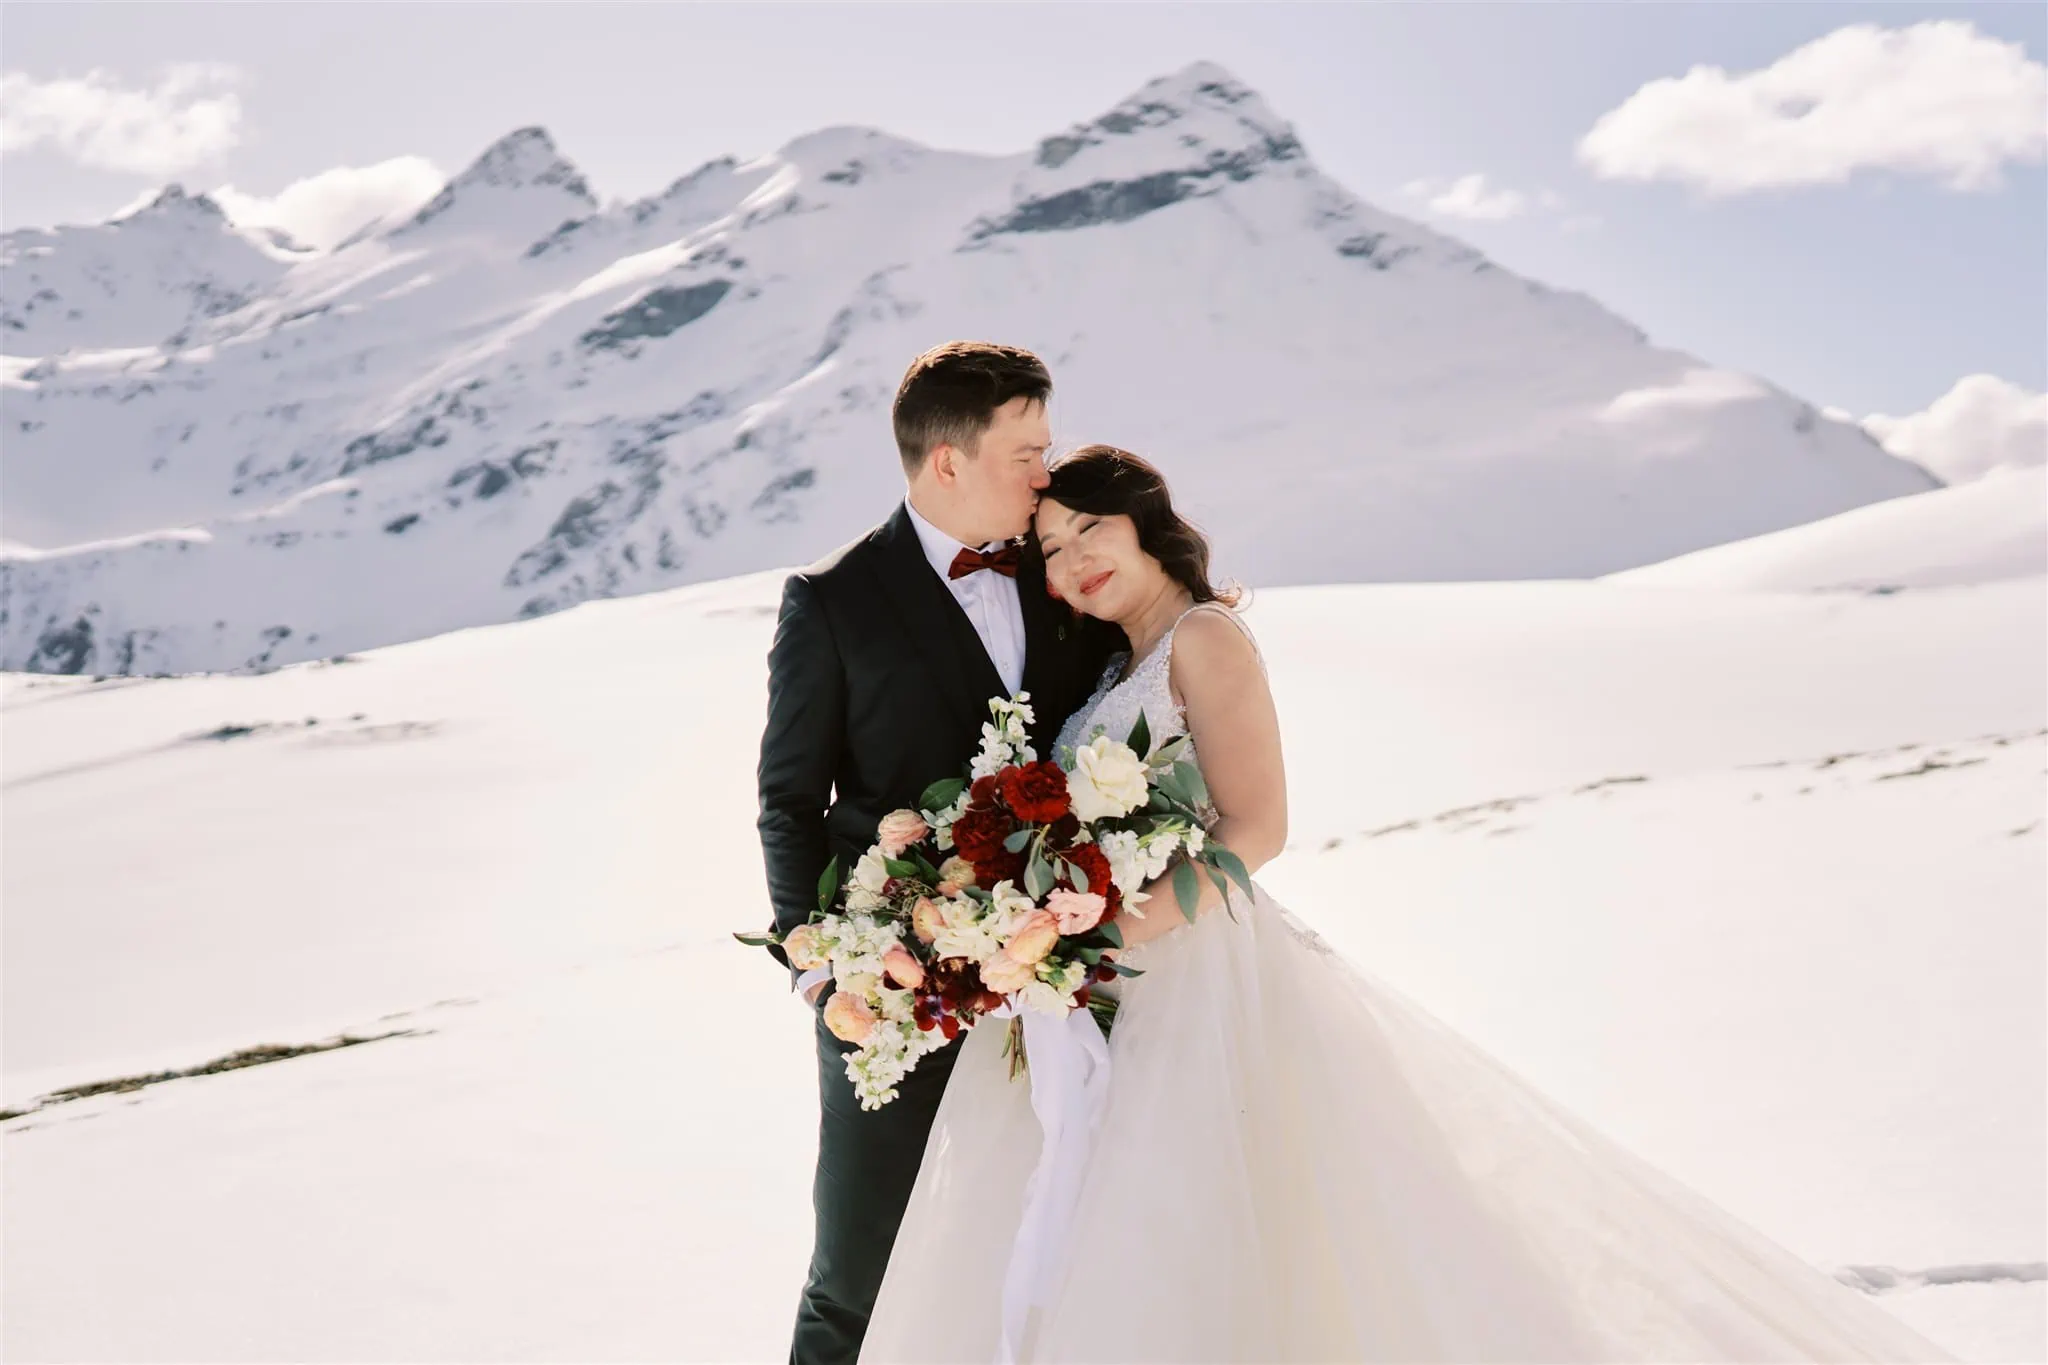 Queenstown Elopement Heli Wedding Photographer クイーンズタウン結婚式 | An elopement wedding with a bride and groom standing in the snow, with mountains in the background.